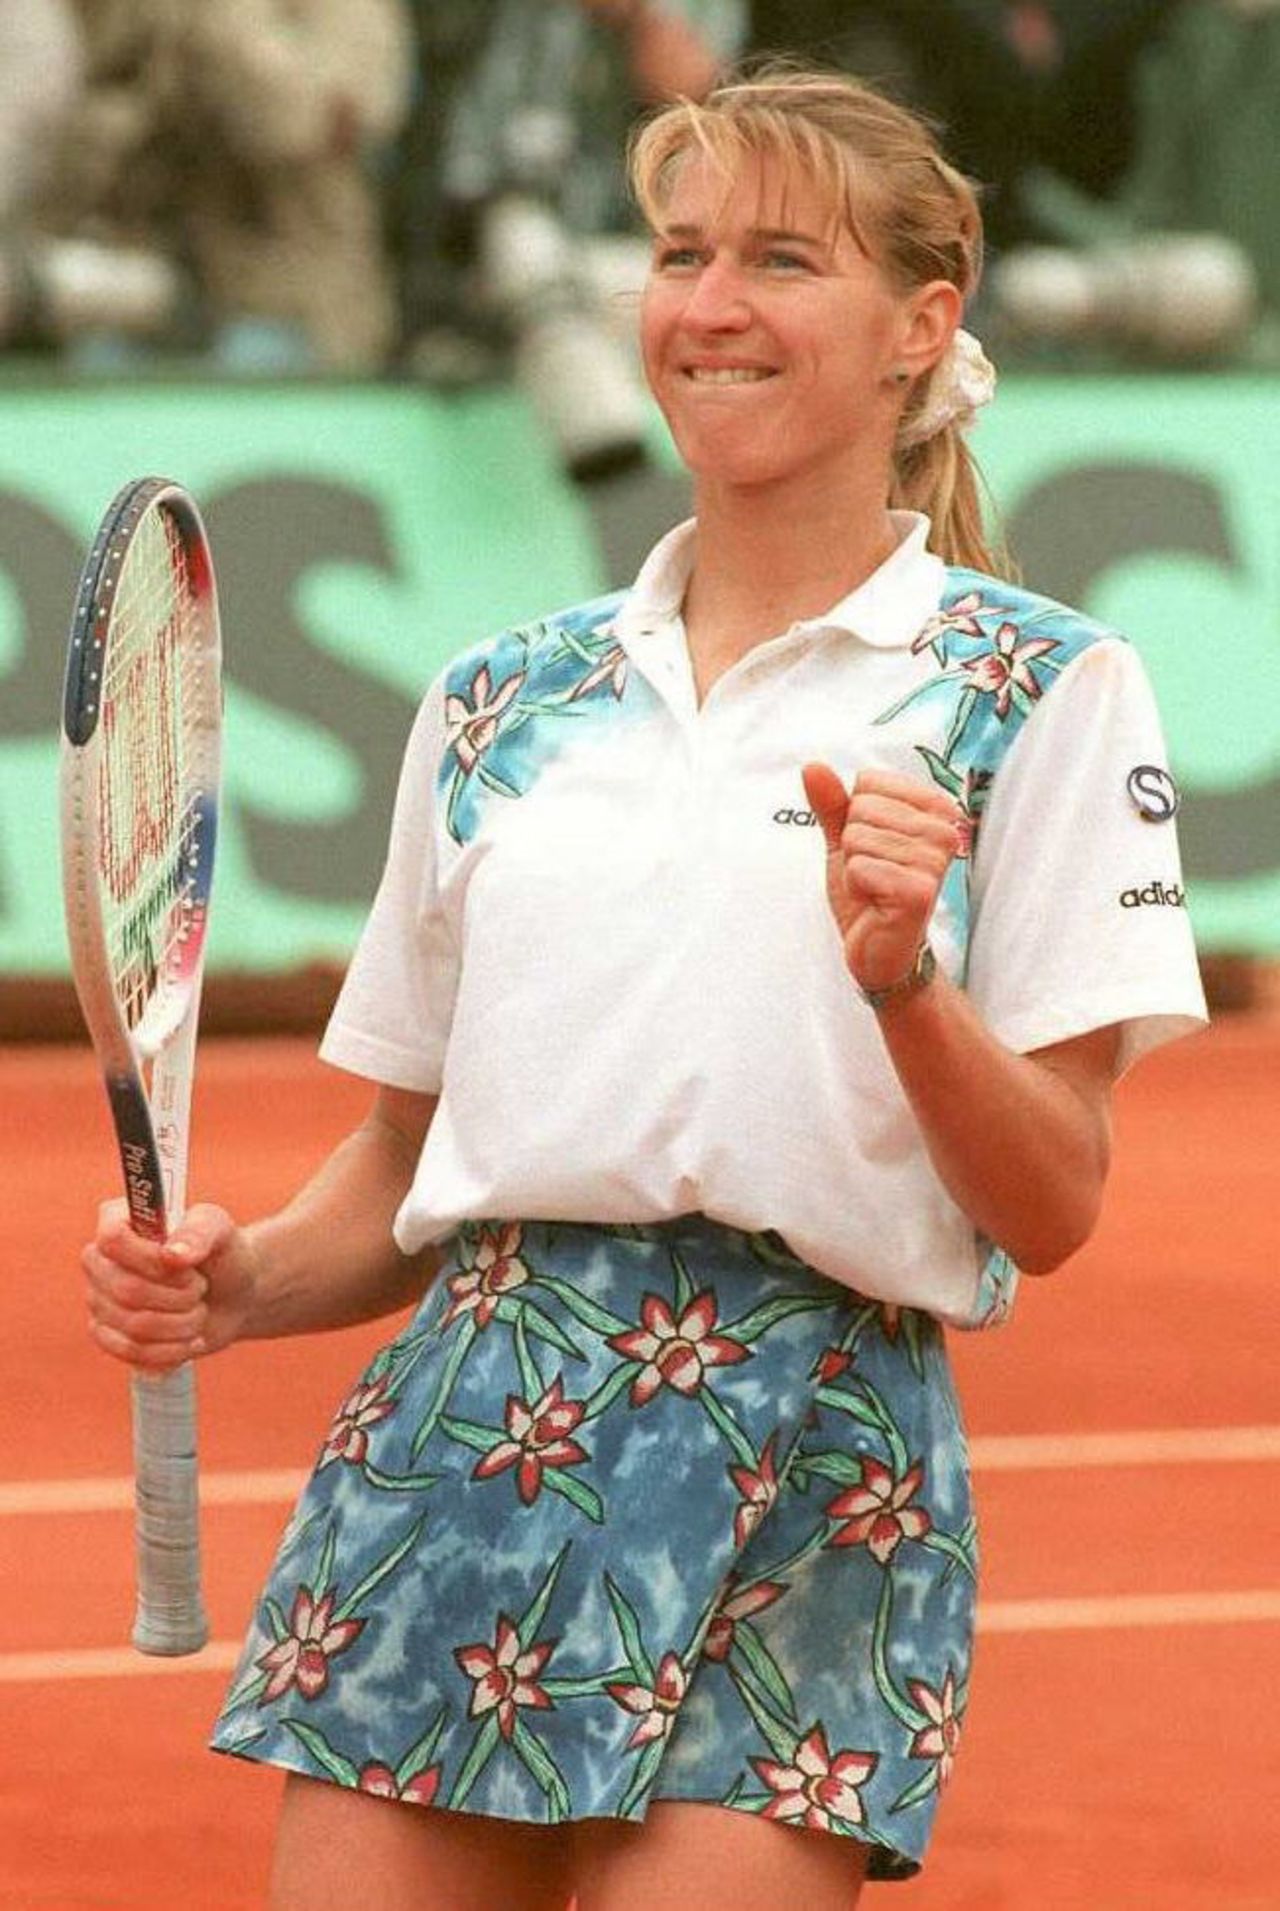 Germany's Steffi Graf wears a floral skirt during the French Open in 1995. Note the scrunchie.  